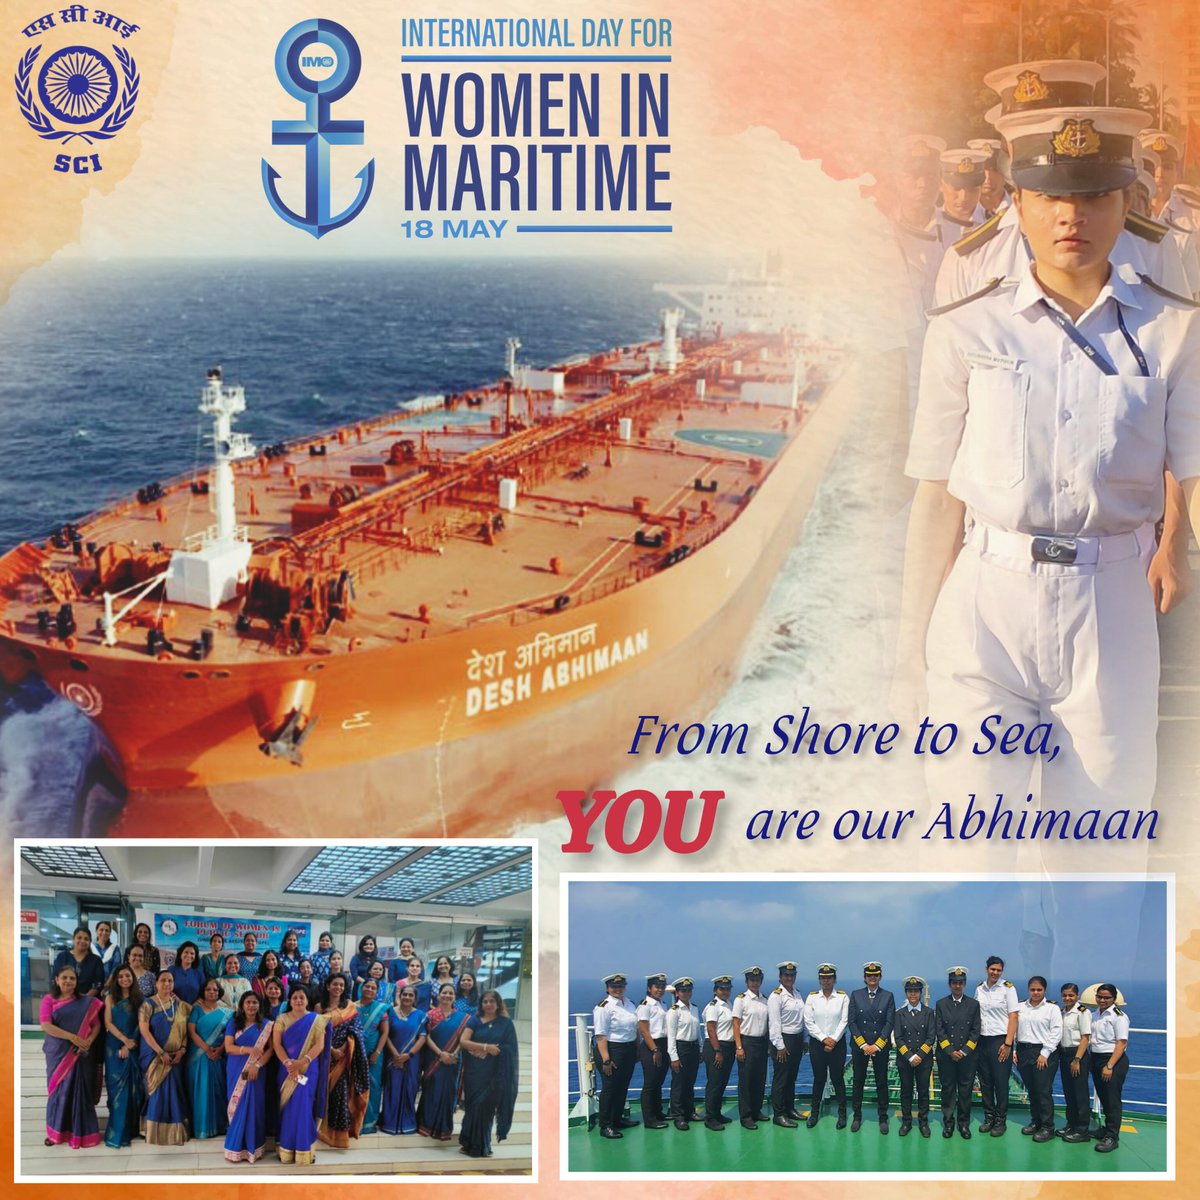 SCI celebrates #WomenInMaritimeDay with the theme Safe Horizons: Women Shaping the Future of Maritime Safety. SCI is proud of being a pioneer in training female cadets for the country & encouraging them to take leading positions across the Maritime Industry - ashore & at sea.